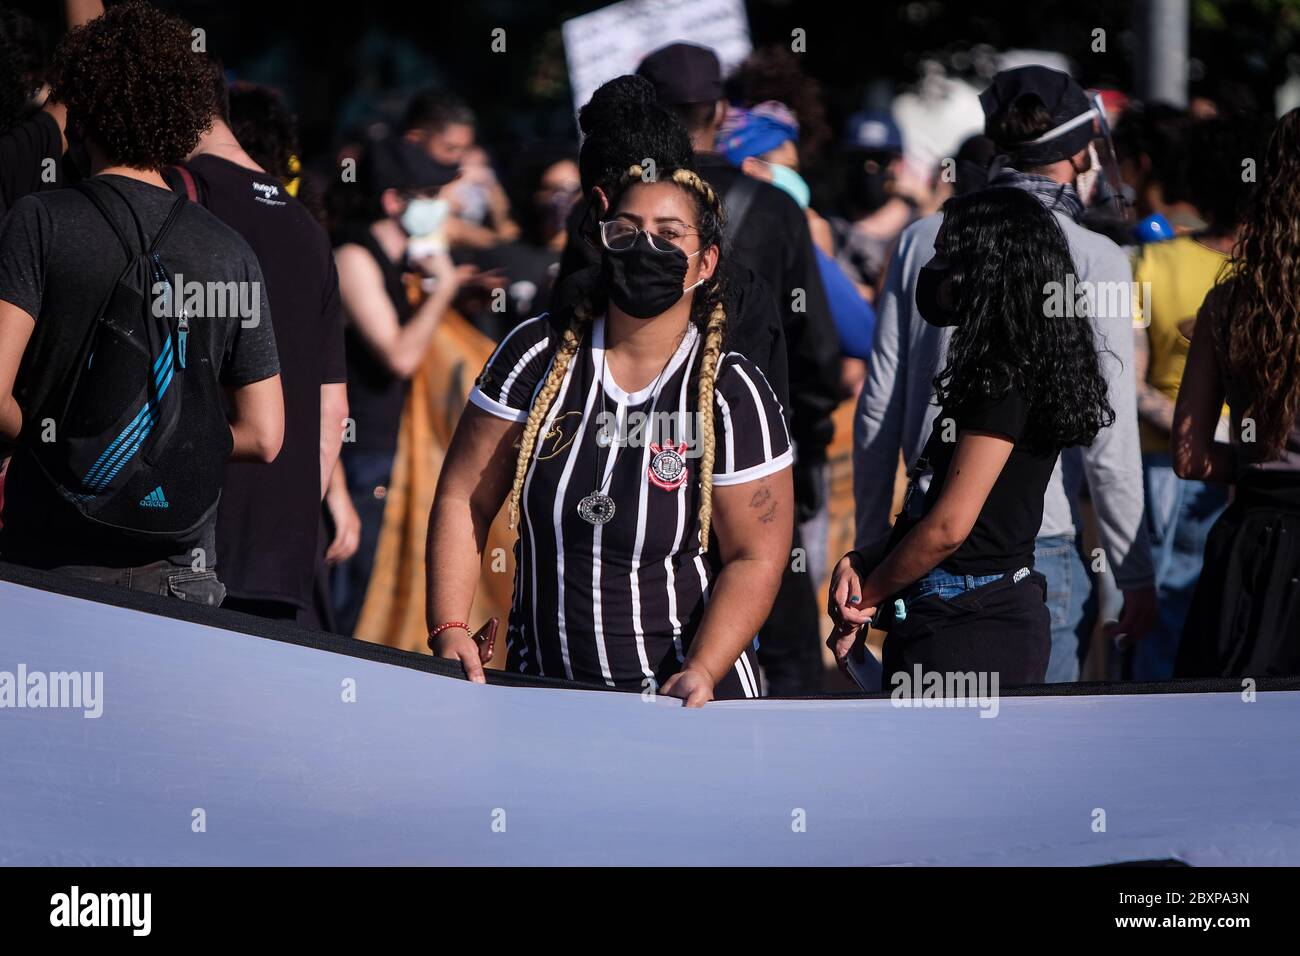 07 June 2020, Brazil, São Paulo: A woman in the Corinthians club jersey takes part in a protest against President Jair Bolsonaro. The demonstrations by Bolsonaro supporters - on the initiative of organised football fans - were the first to meet with resistance. Photo: Lincon Zarbietti/dpa Stock Photo